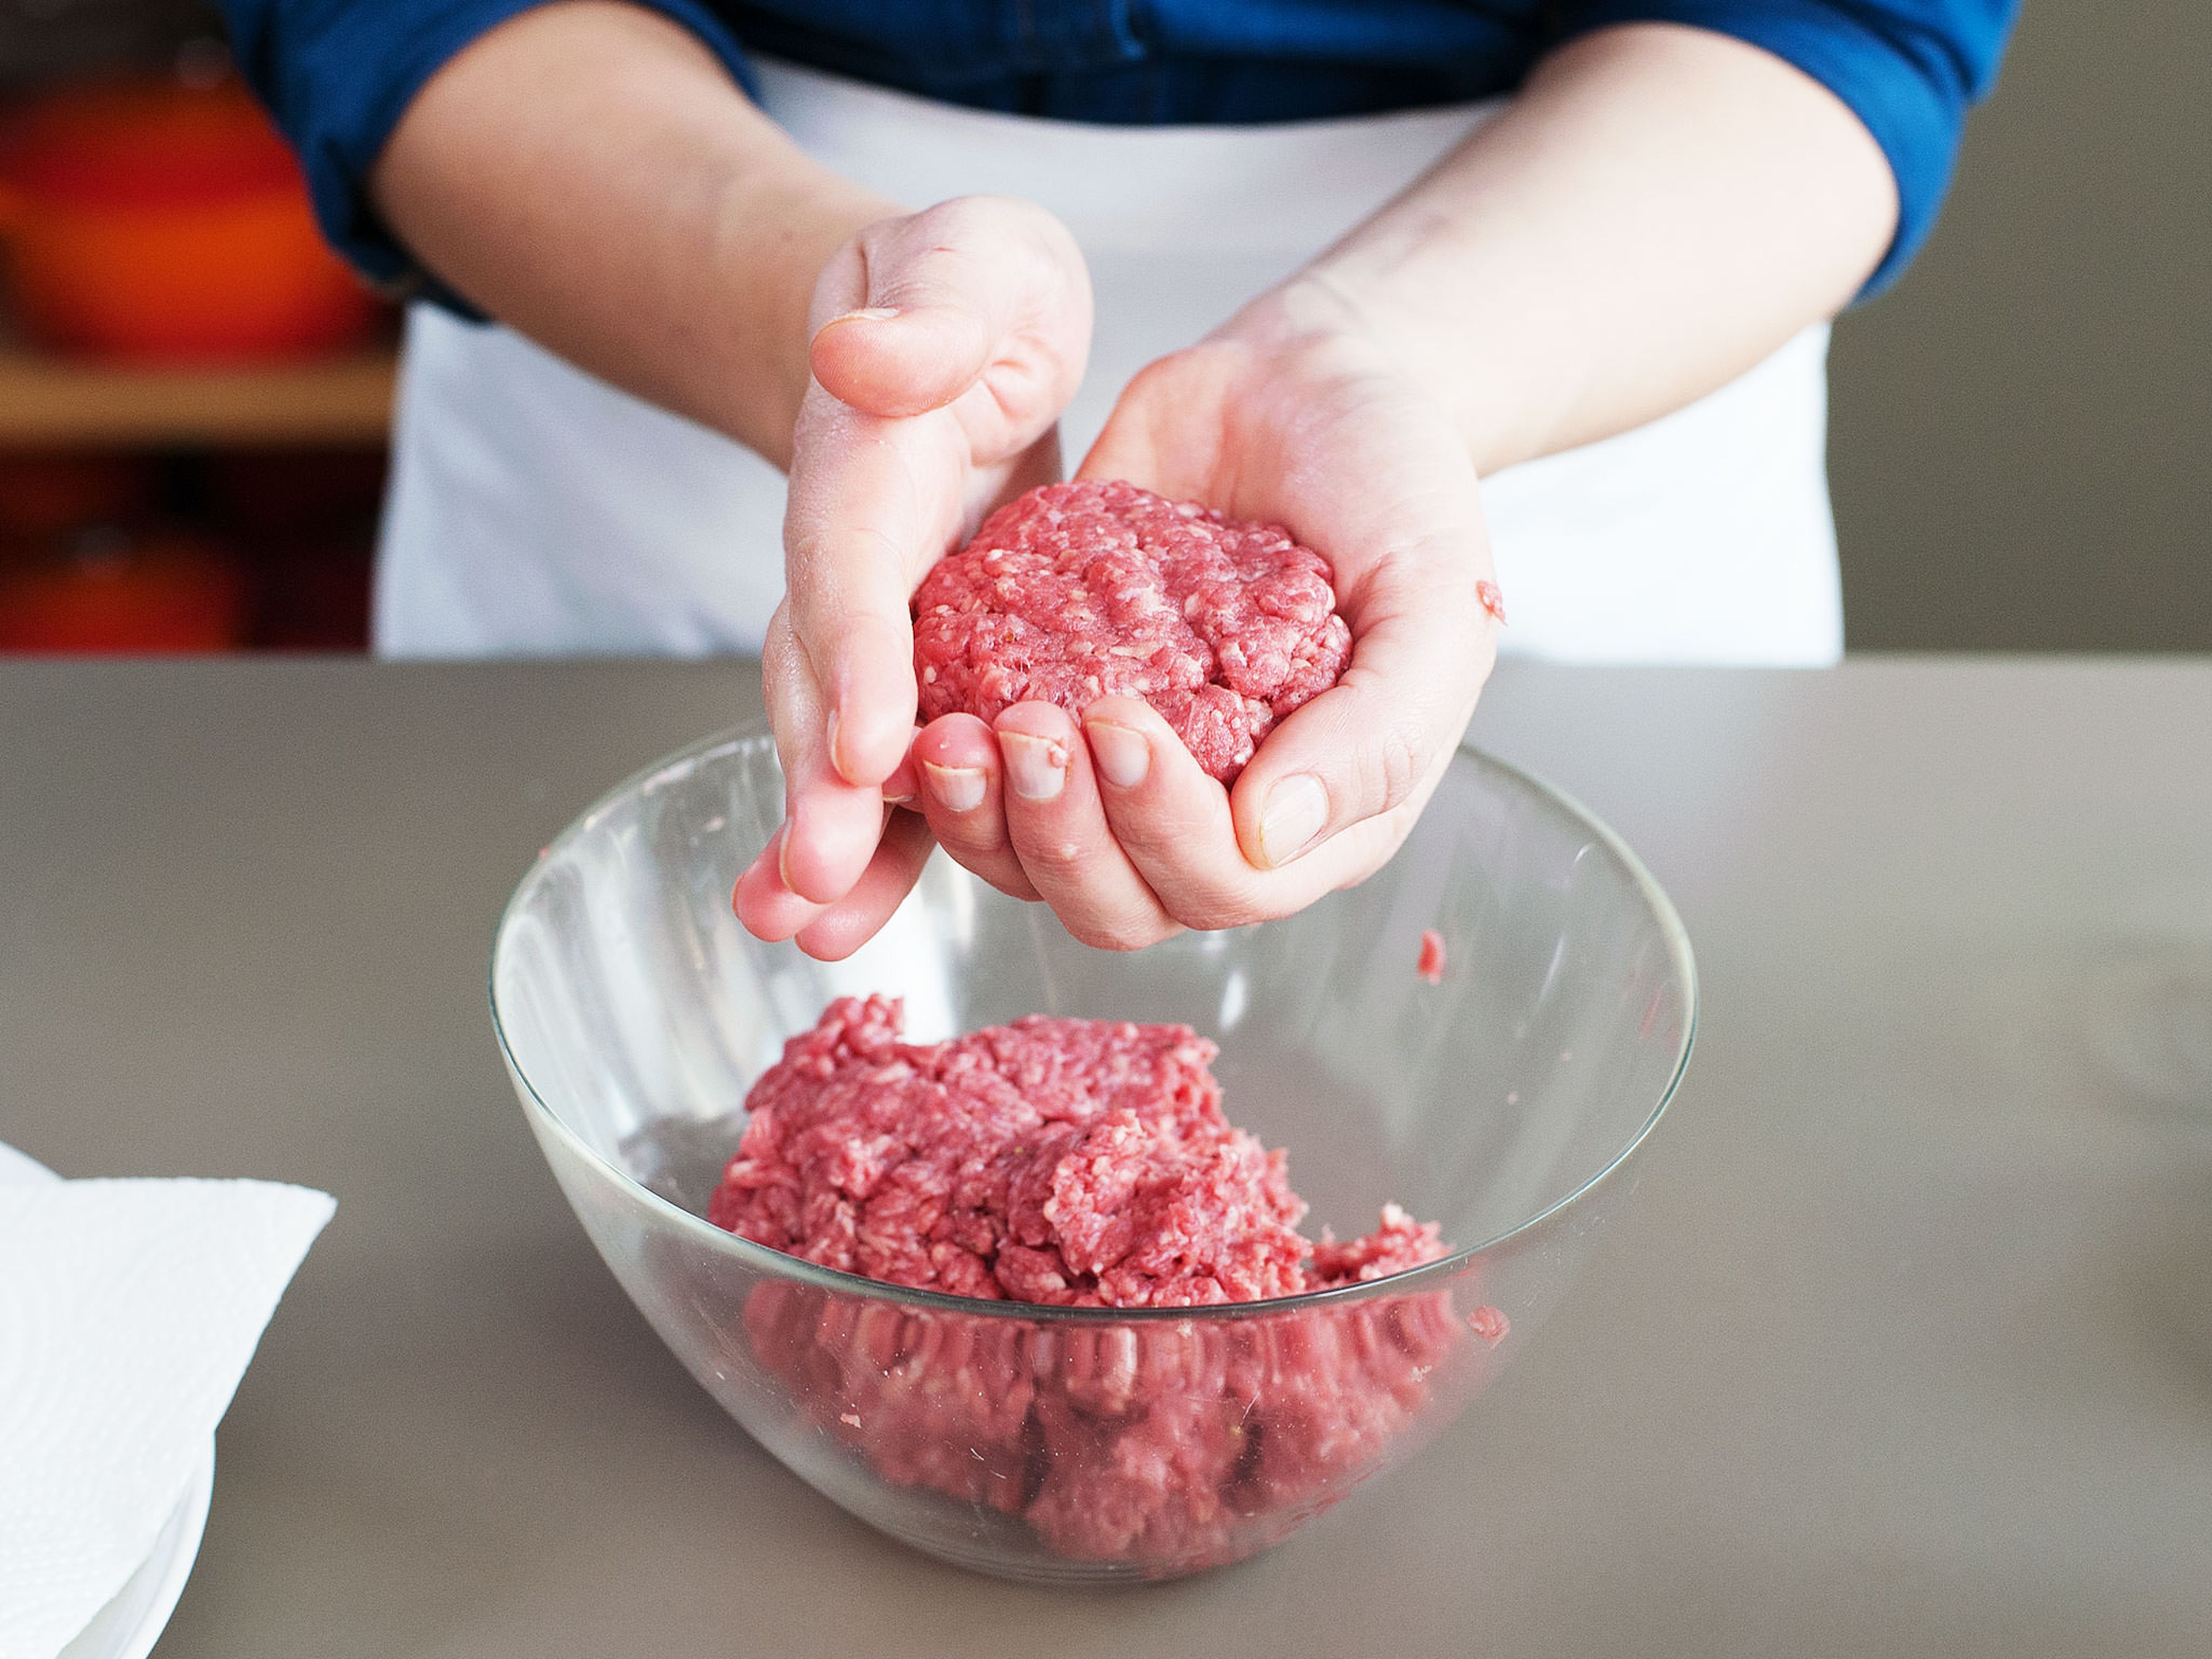 For the patties, season ground beef with salt and pepper.